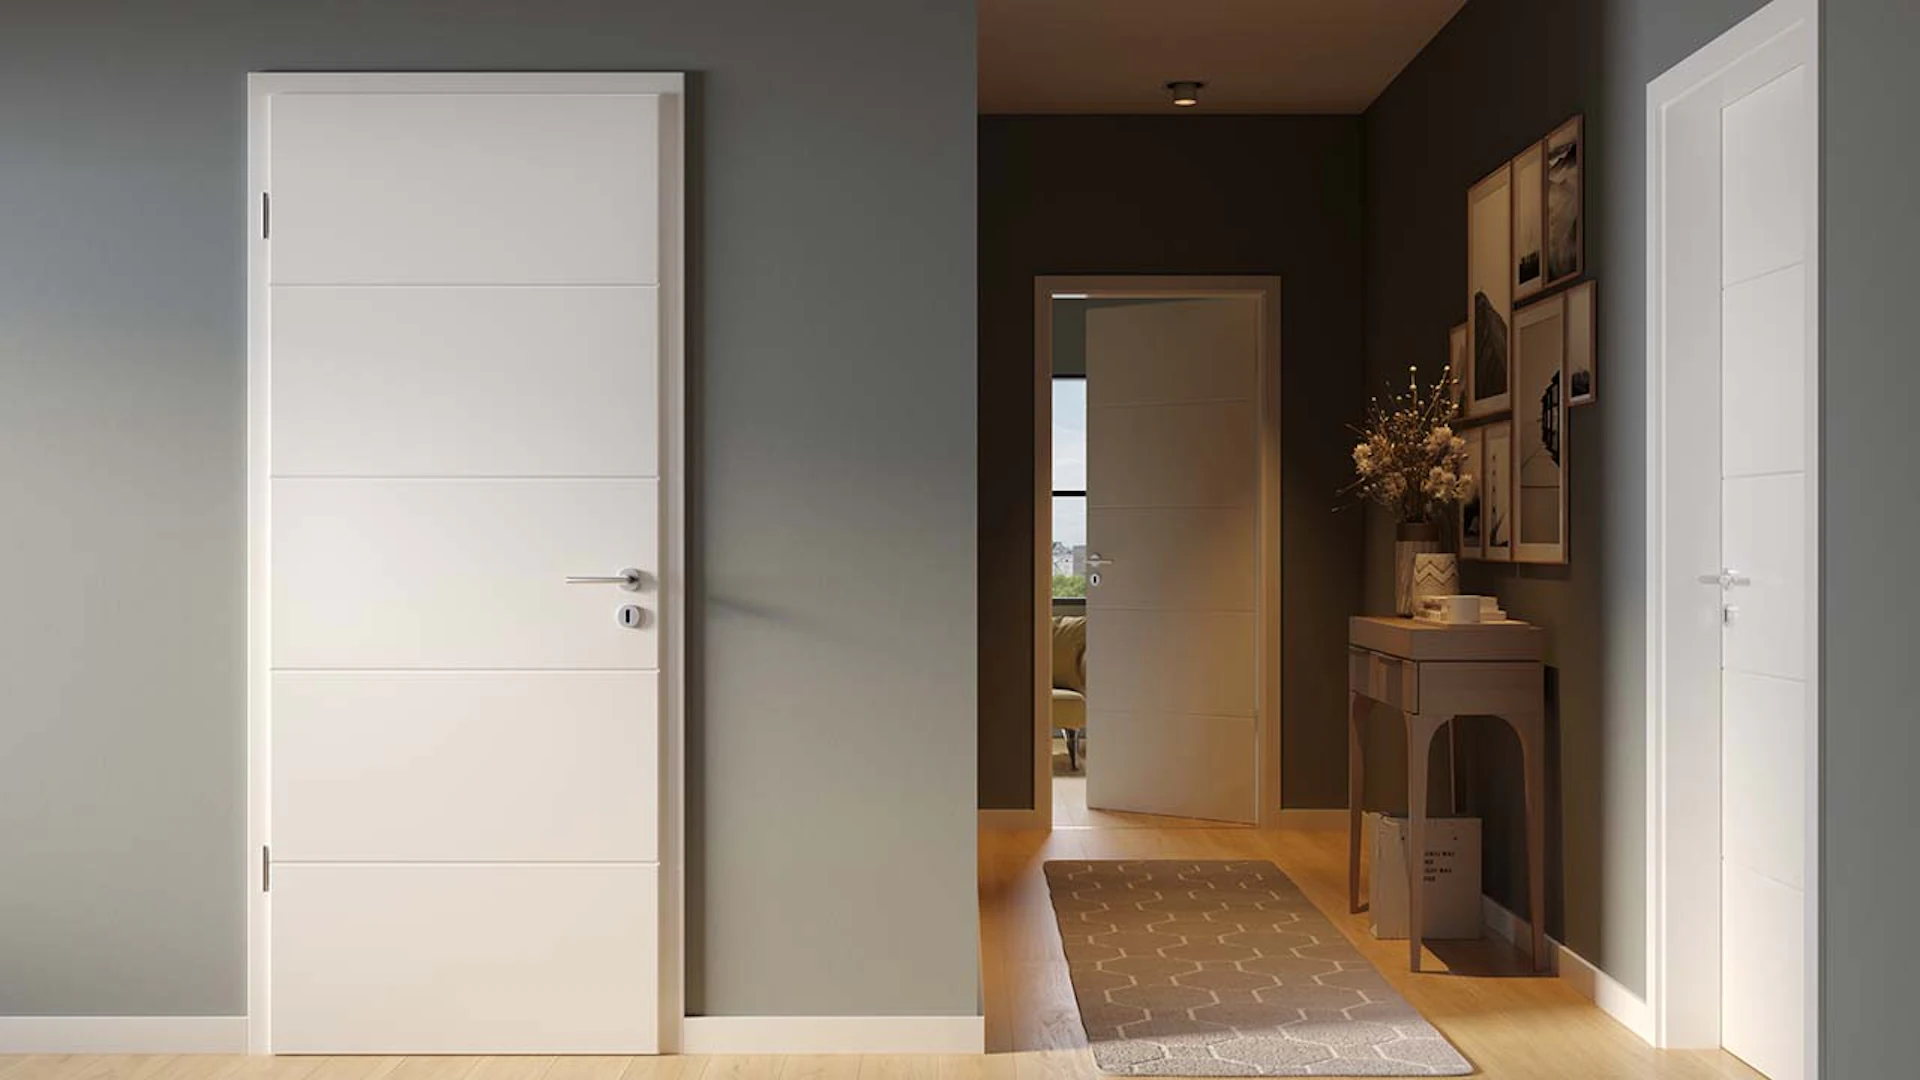 planeo interior door lacquer 2.0 - Kinga 9010 white lacquer 1985 x 860 mm DIN L - round RSP hinge 3-t